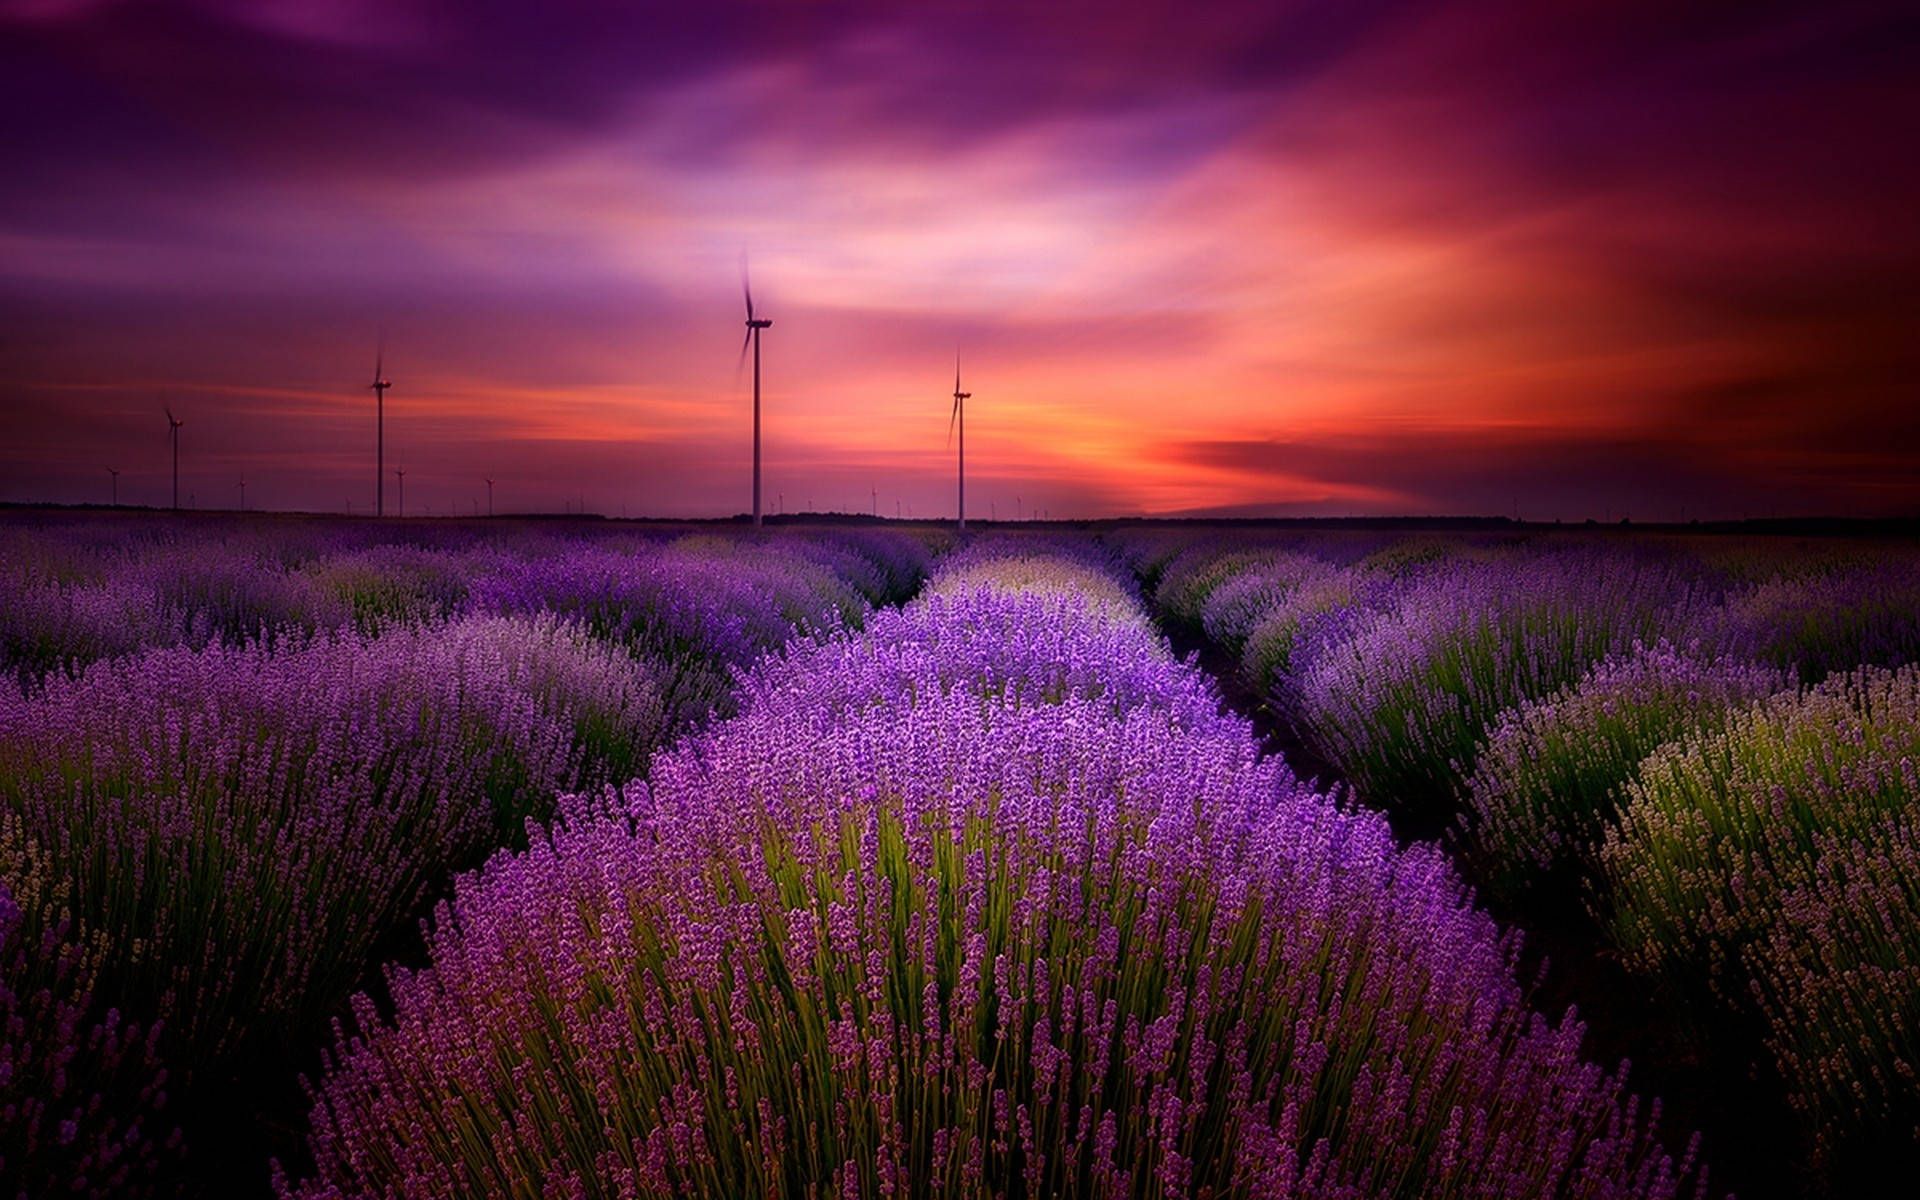 A field of lavender flowers with windmills in the background - Lavender